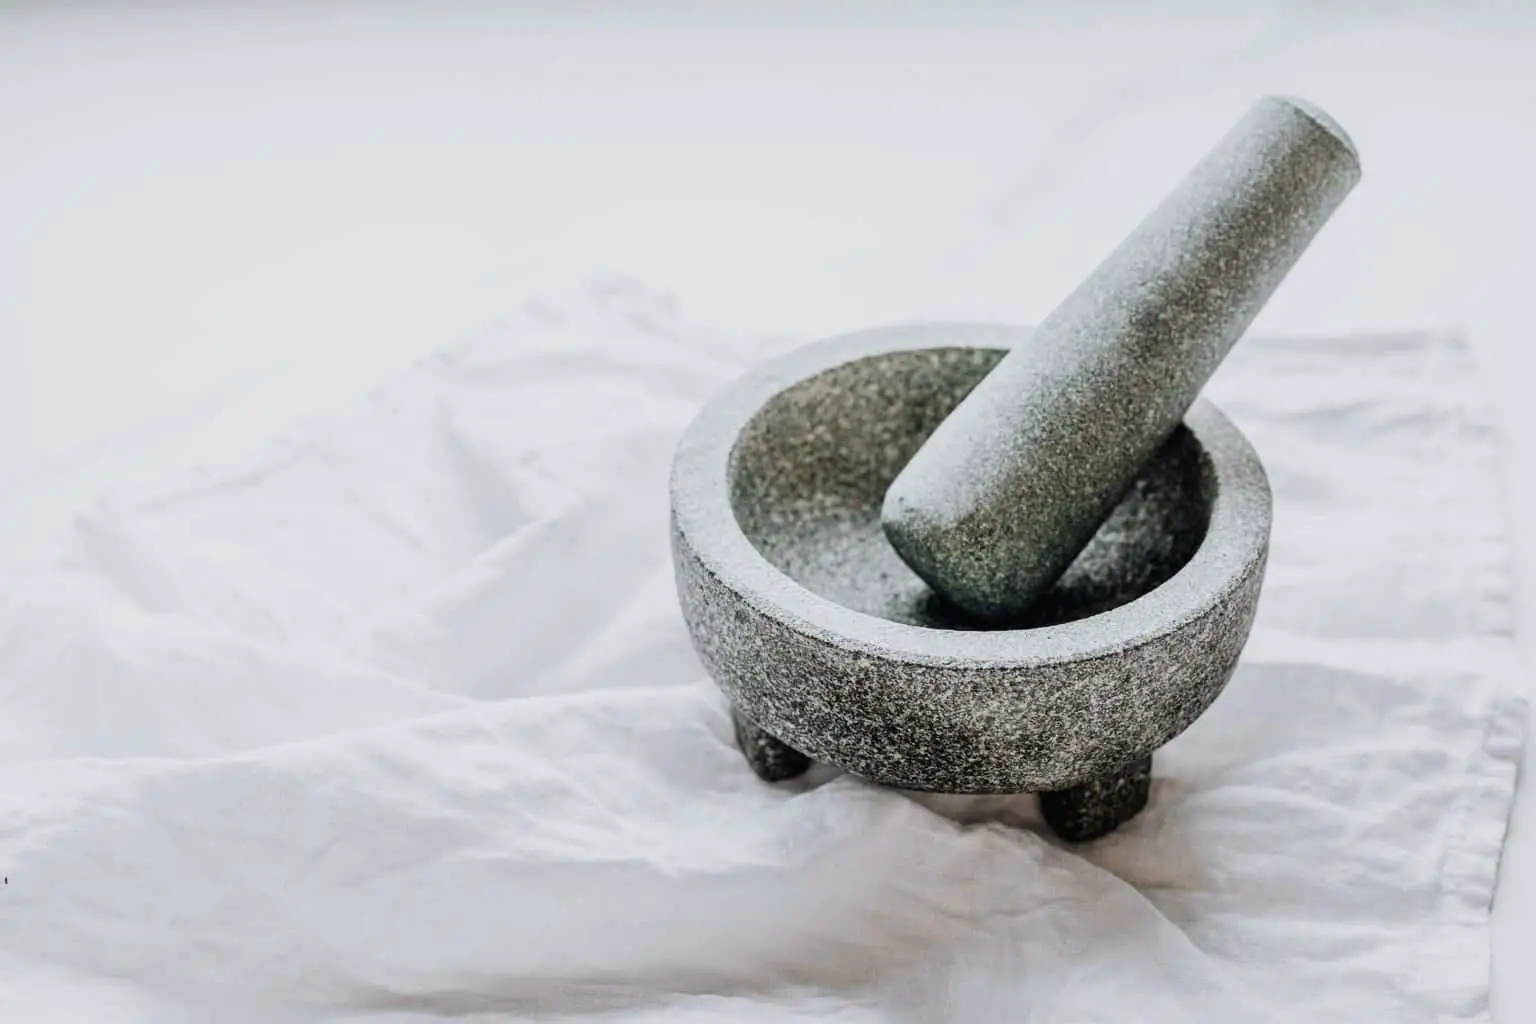 Mortar and pestle on white cloth